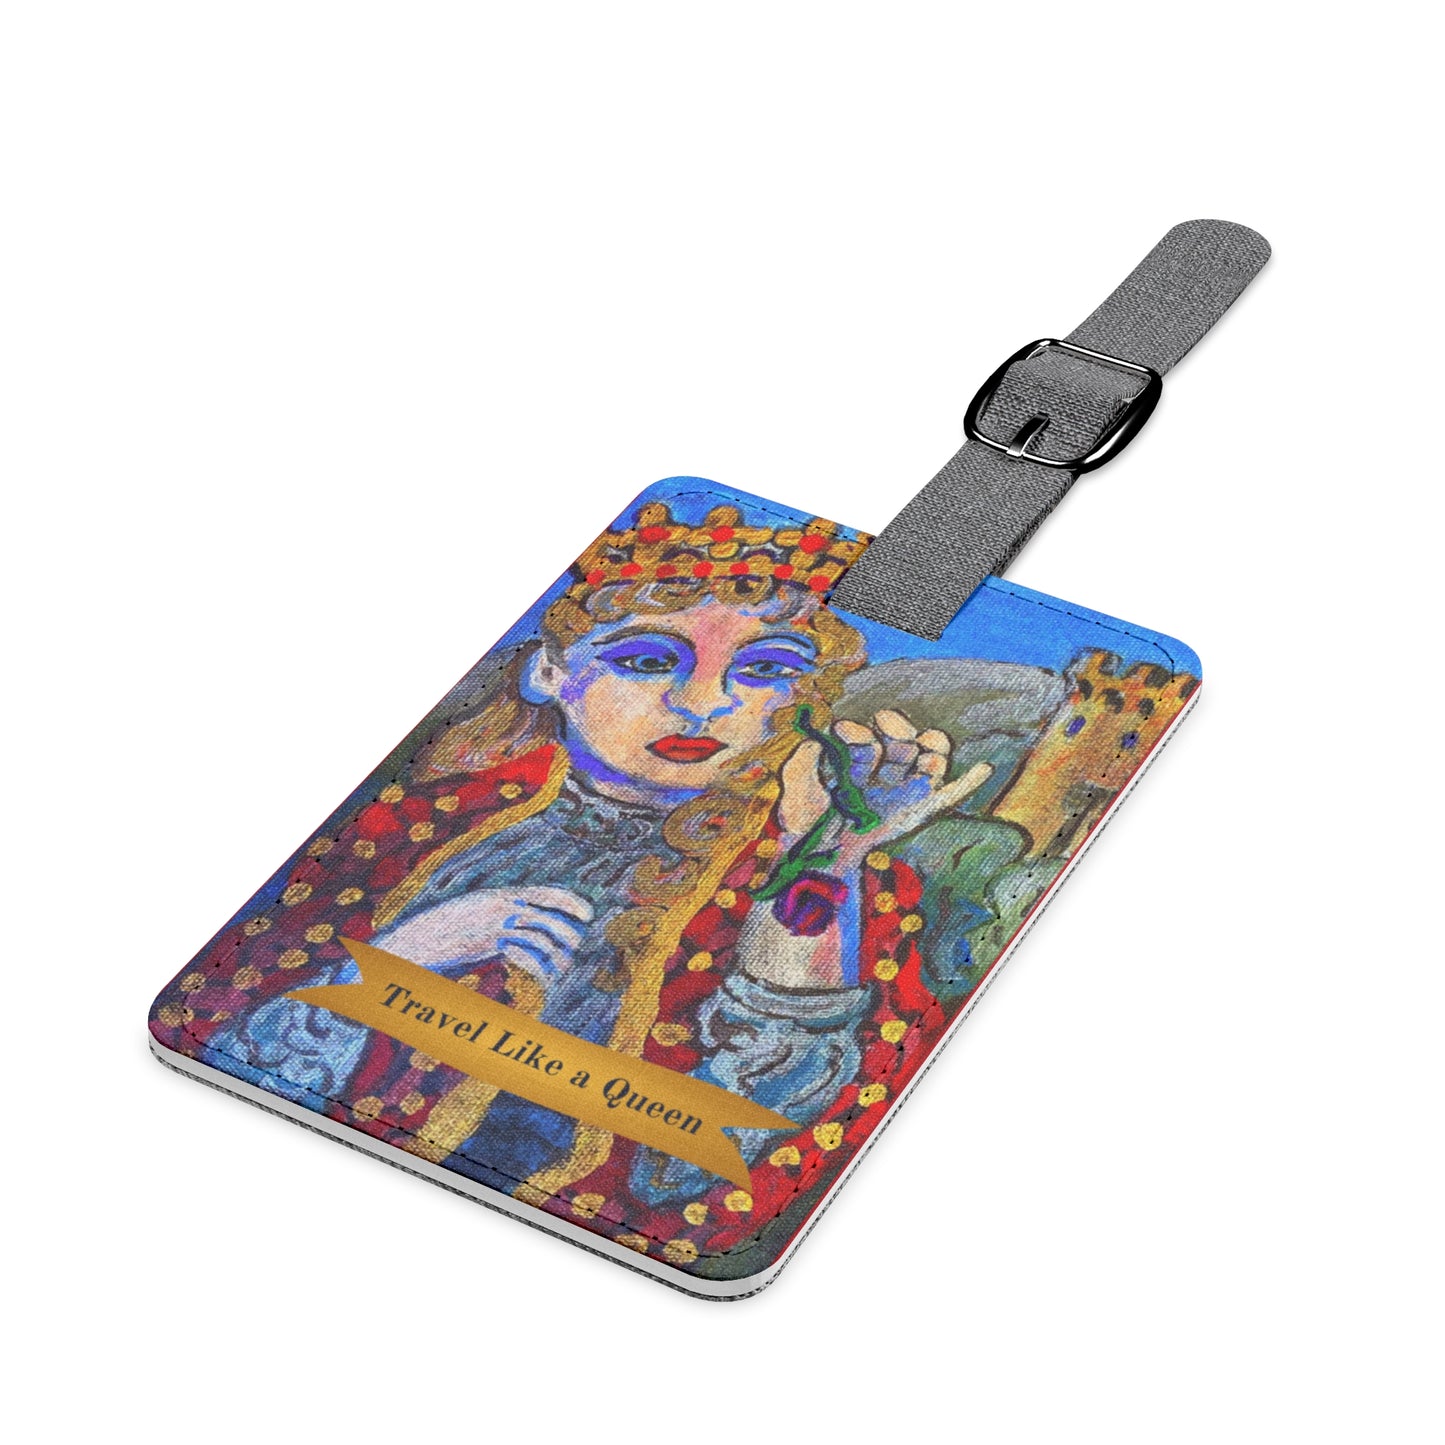 Luggage Tag - Travel Like a Queen